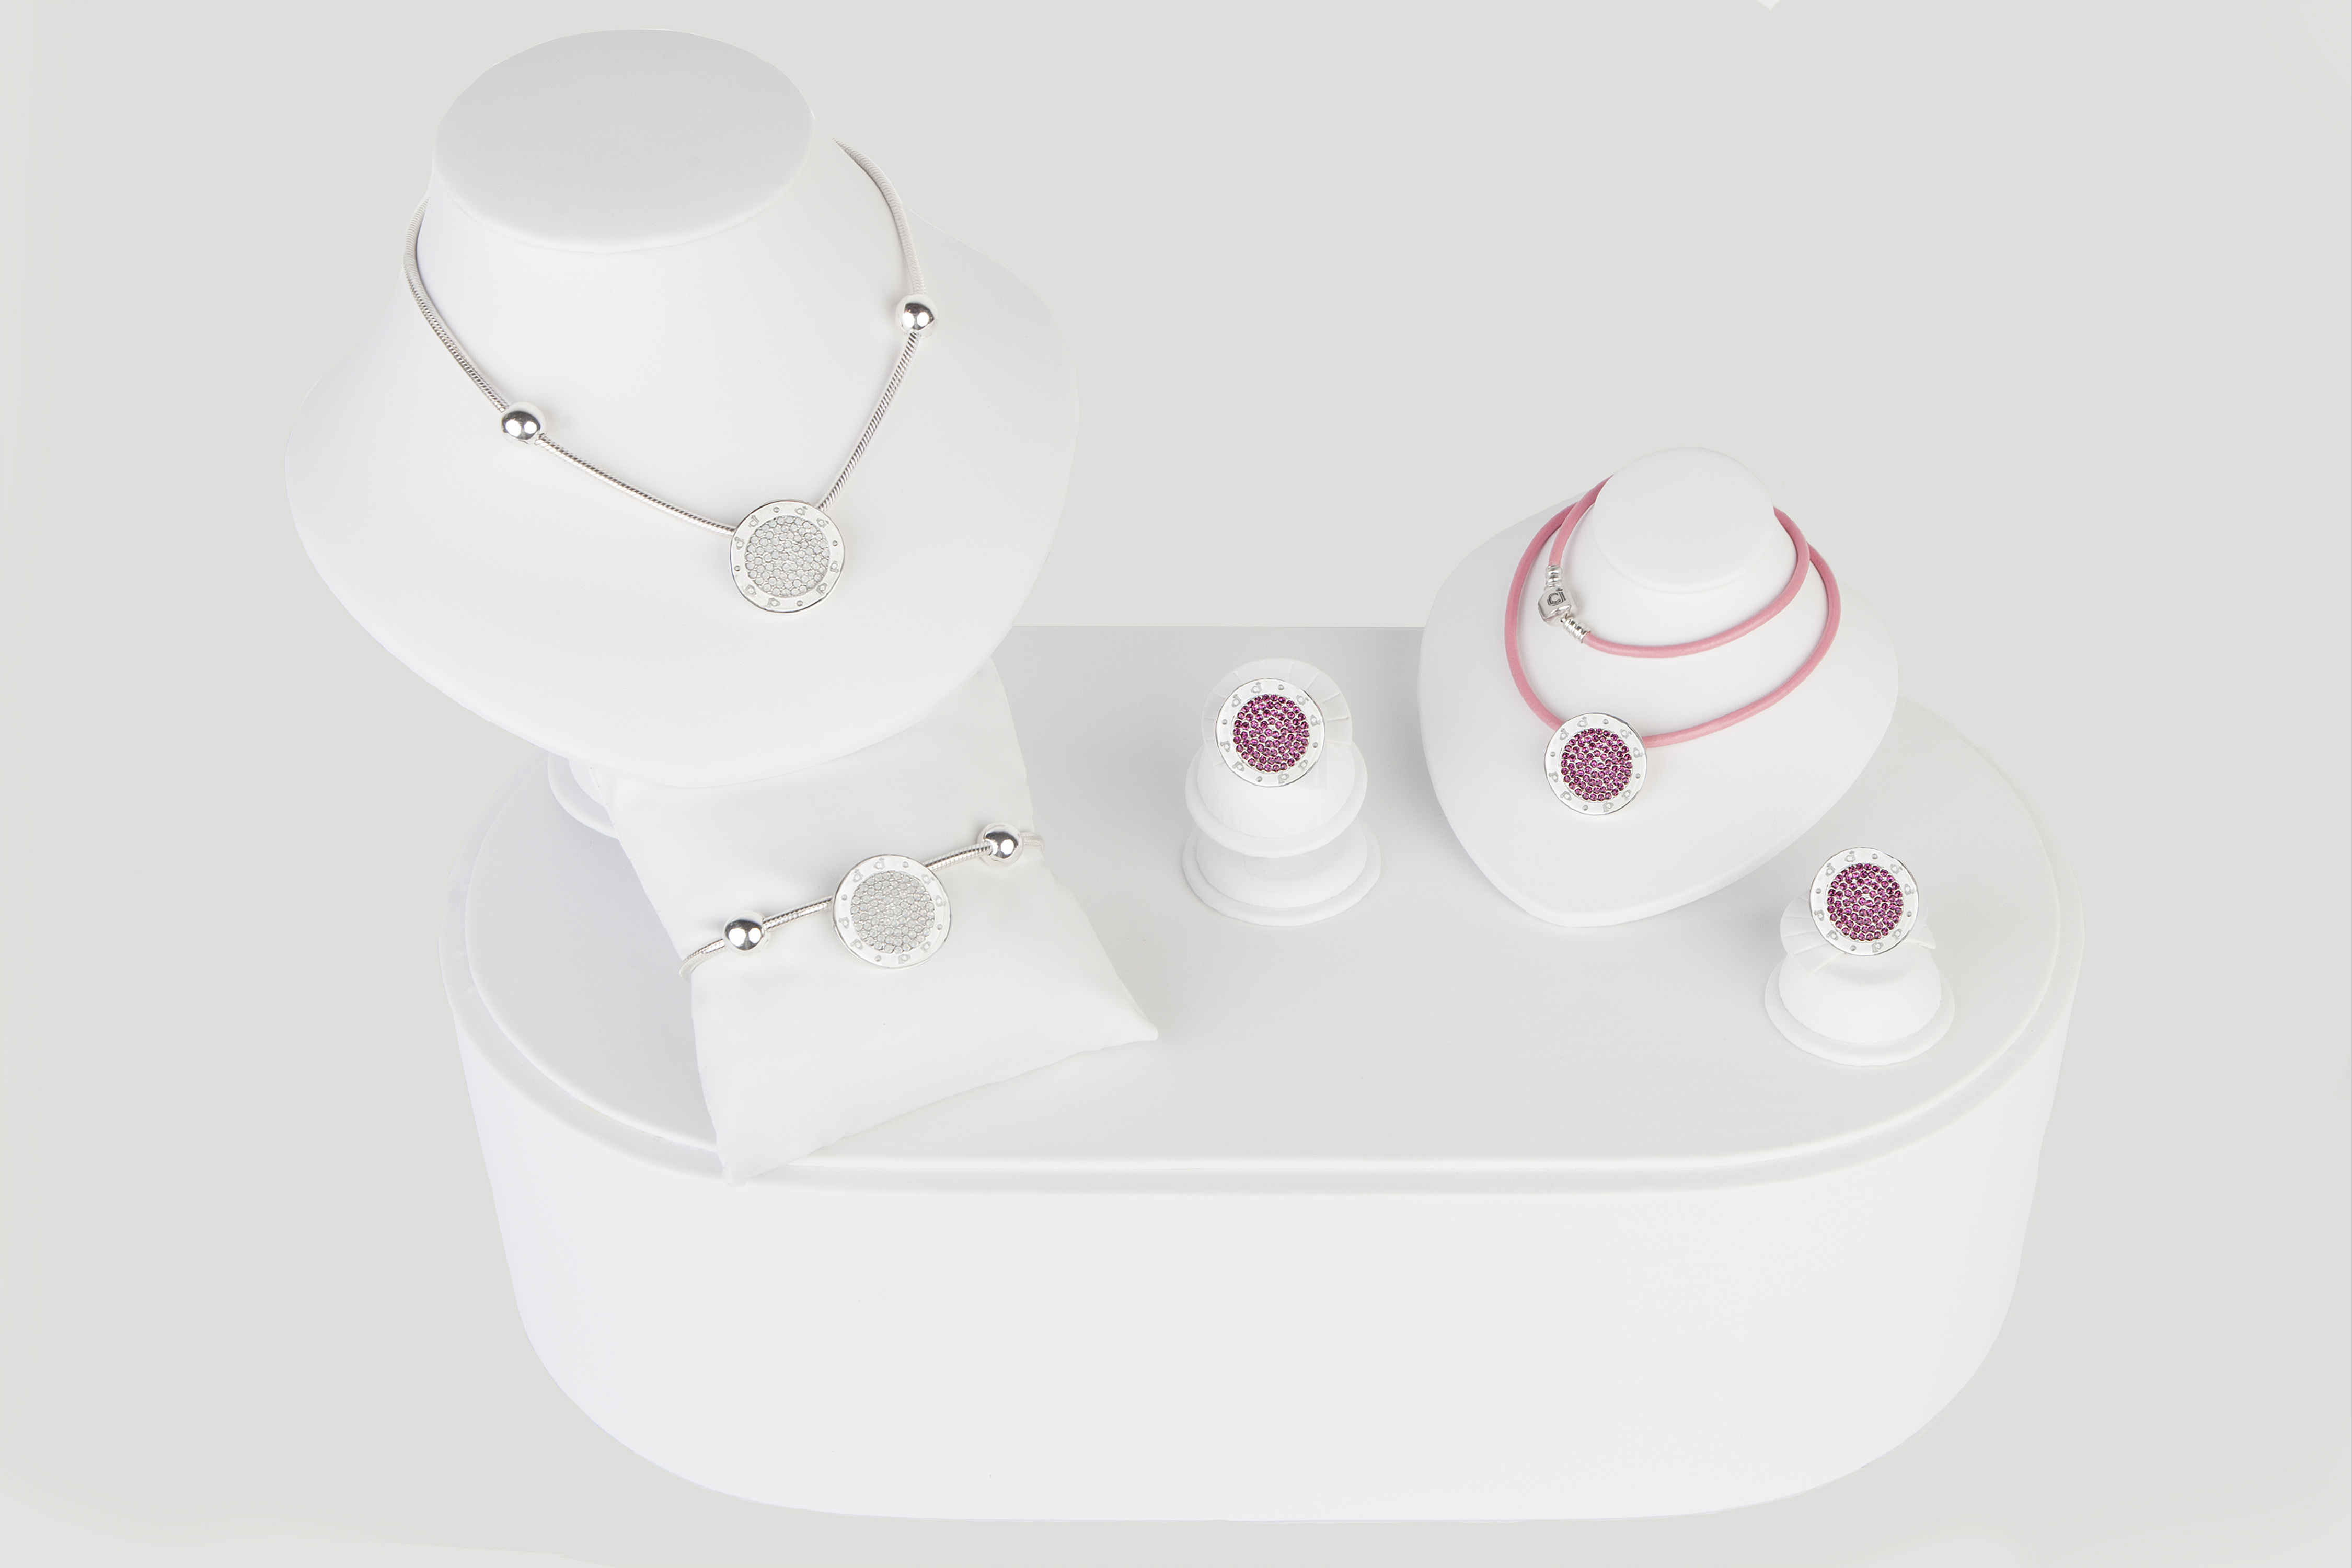 The CJ Bridal Silver Charm Collection kit